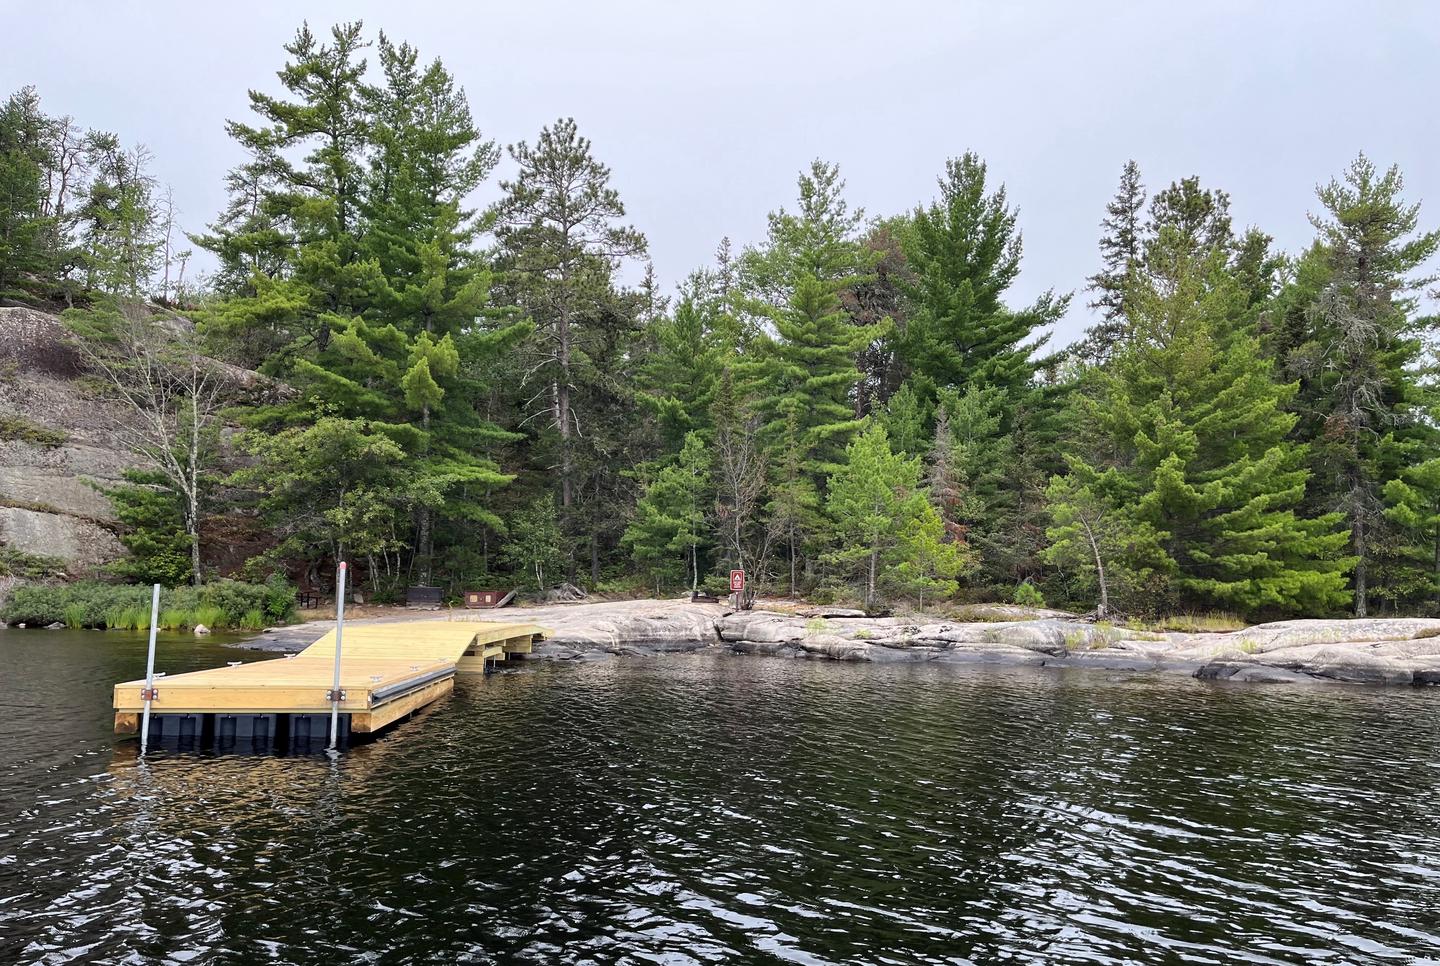 View of dock landing and campsite from water.Dock landing and campsite from water